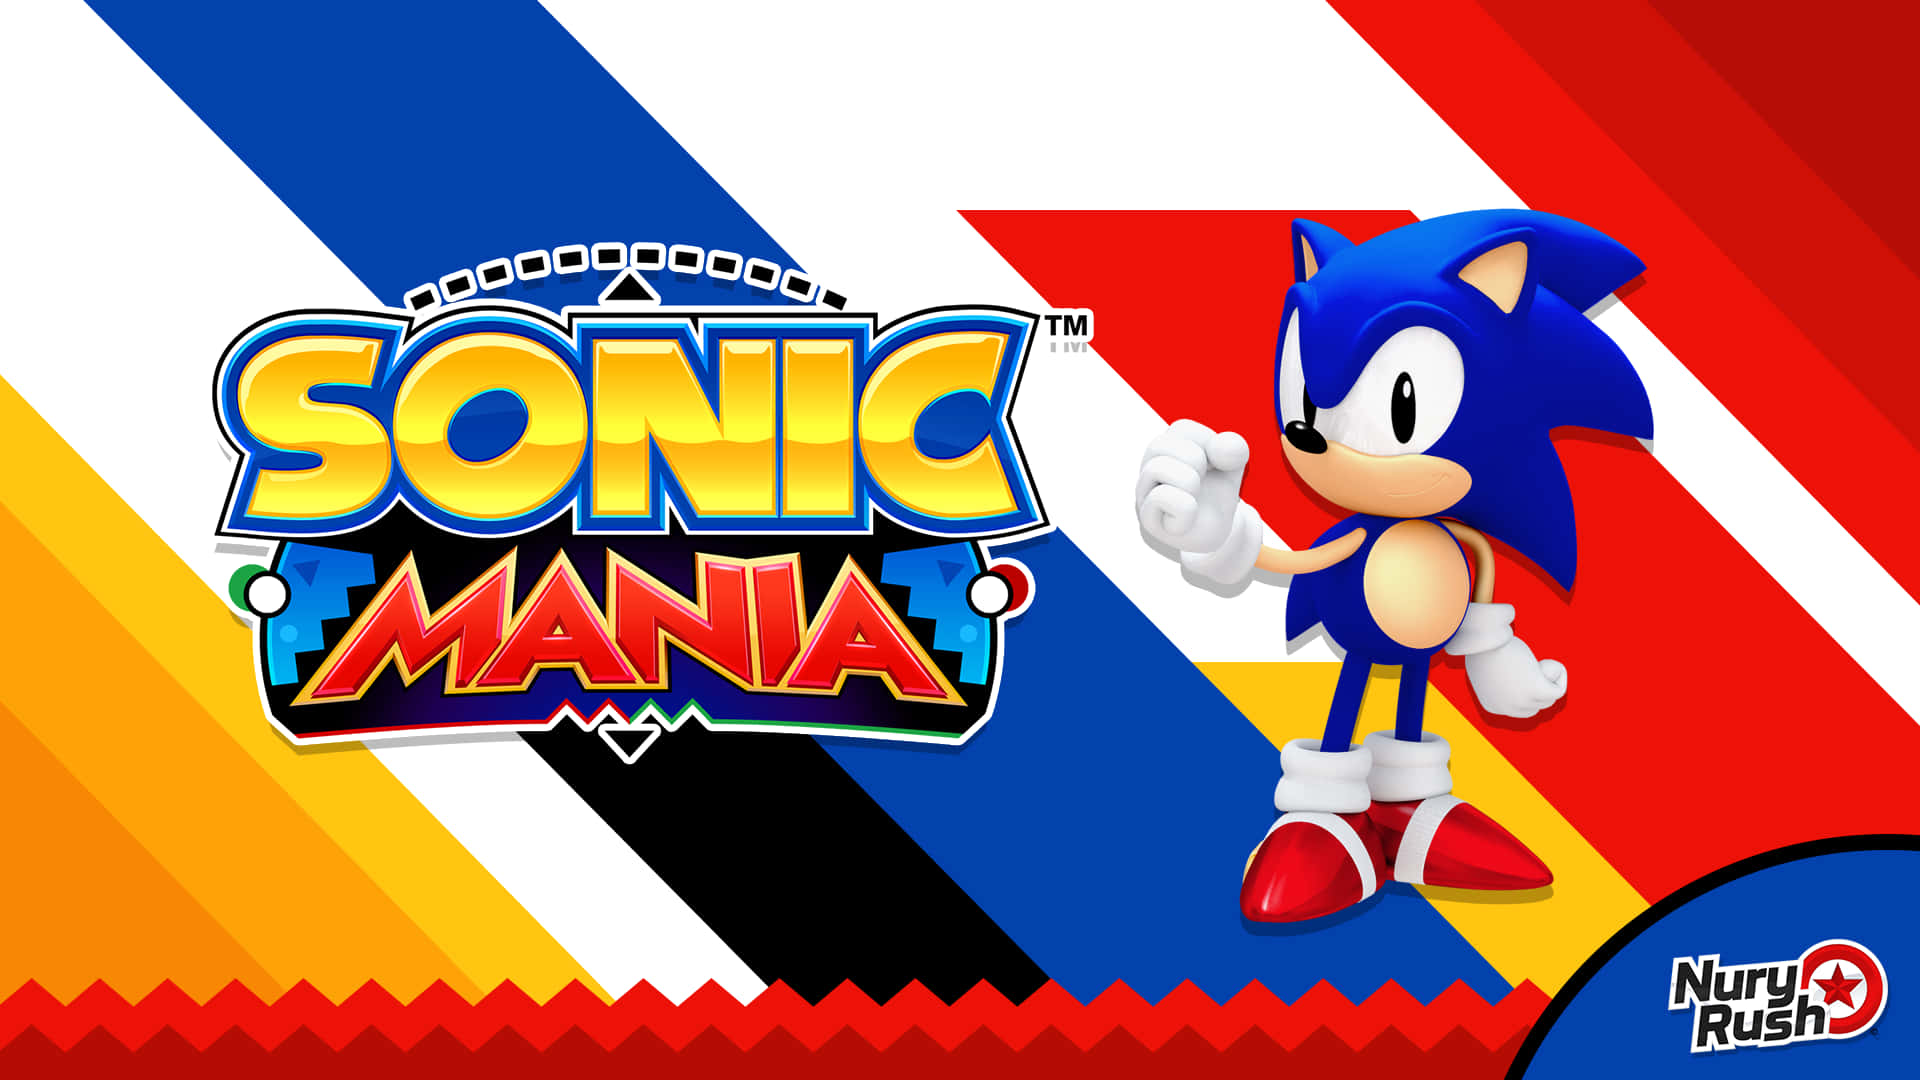 Race ahead with Sonic Mania Wallpaper